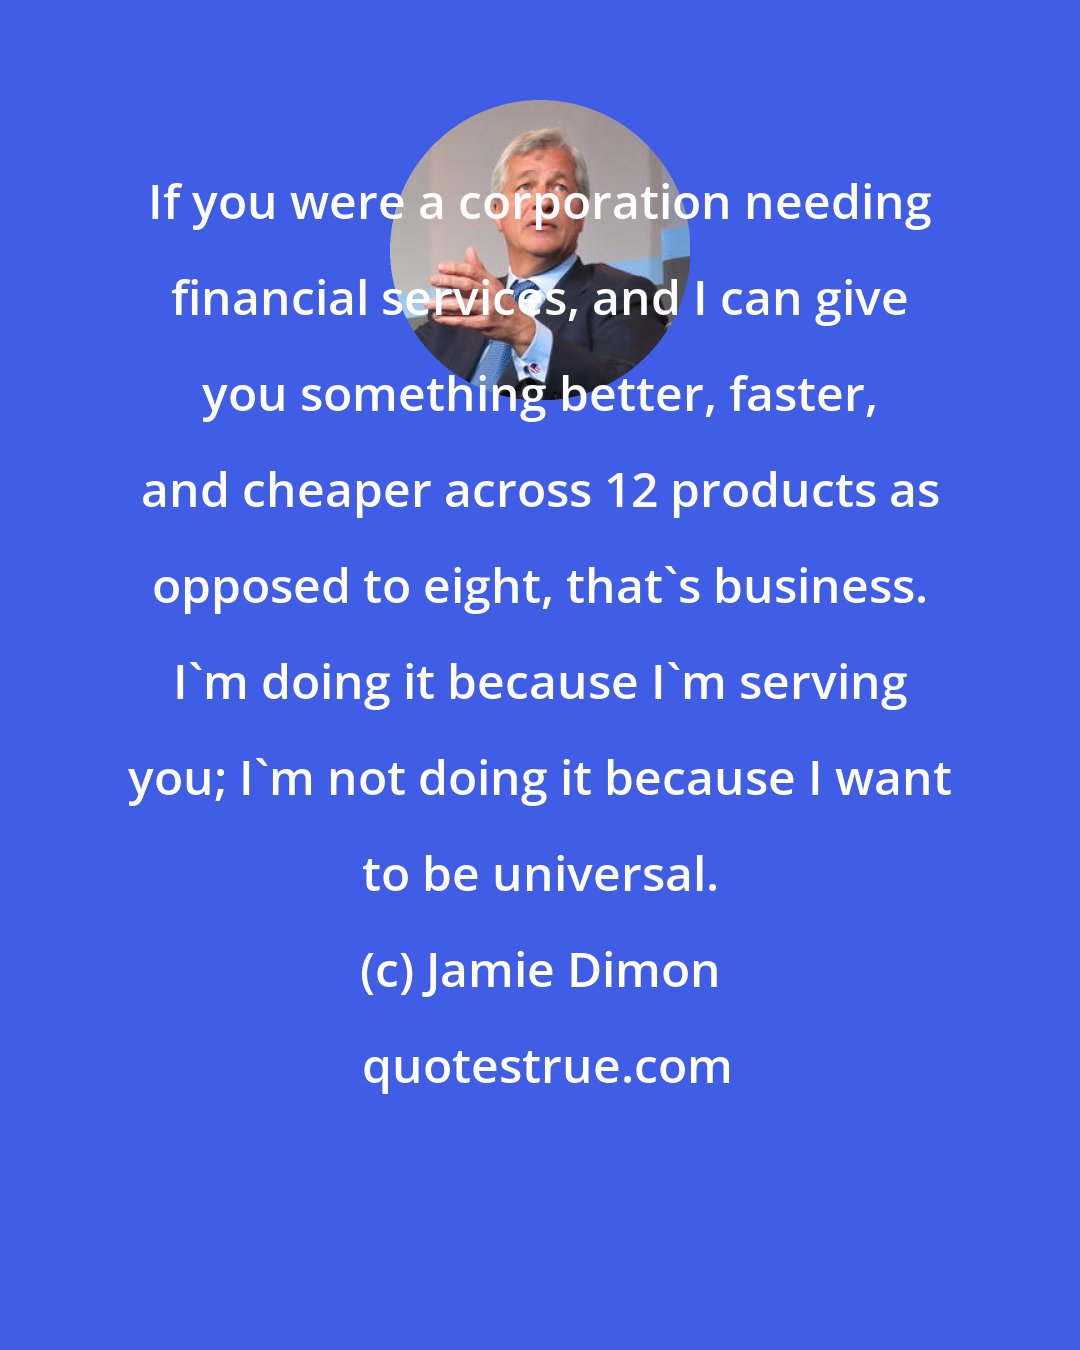 Jamie Dimon: If you were a corporation needing financial services, and I can give you something better, faster, and cheaper across 12 products as opposed to eight, that's business. I'm doing it because I'm serving you; I'm not doing it because I want to be universal.